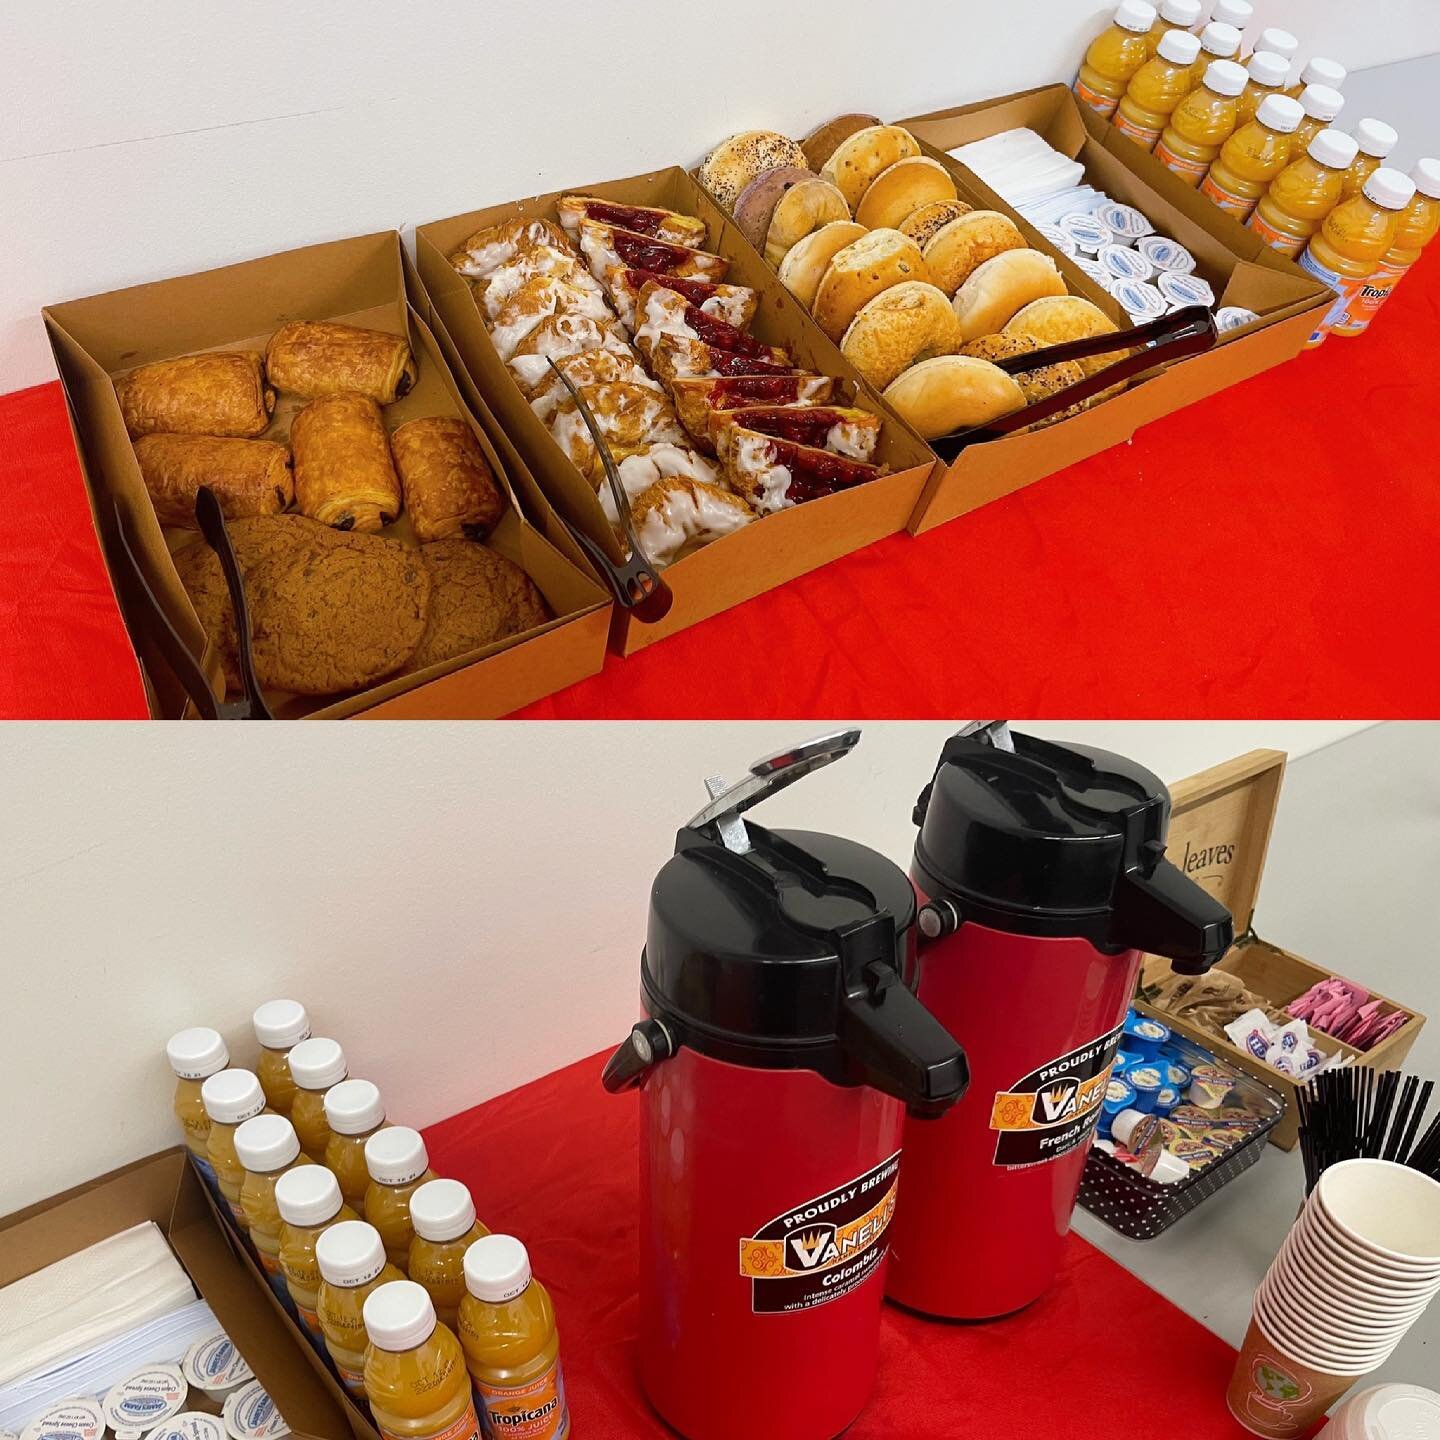 Let&rsquo;s have Breakfast! ☕️🍪🧁 We have all of your favorites, from Donuts to Danishes, Bagels, Muffins, Fresh Baked Chocolate Chip Cookies, Fresh Chocolate Croissants &amp; more! Great way to wake your team up for the day. ☀️

Visit our website a